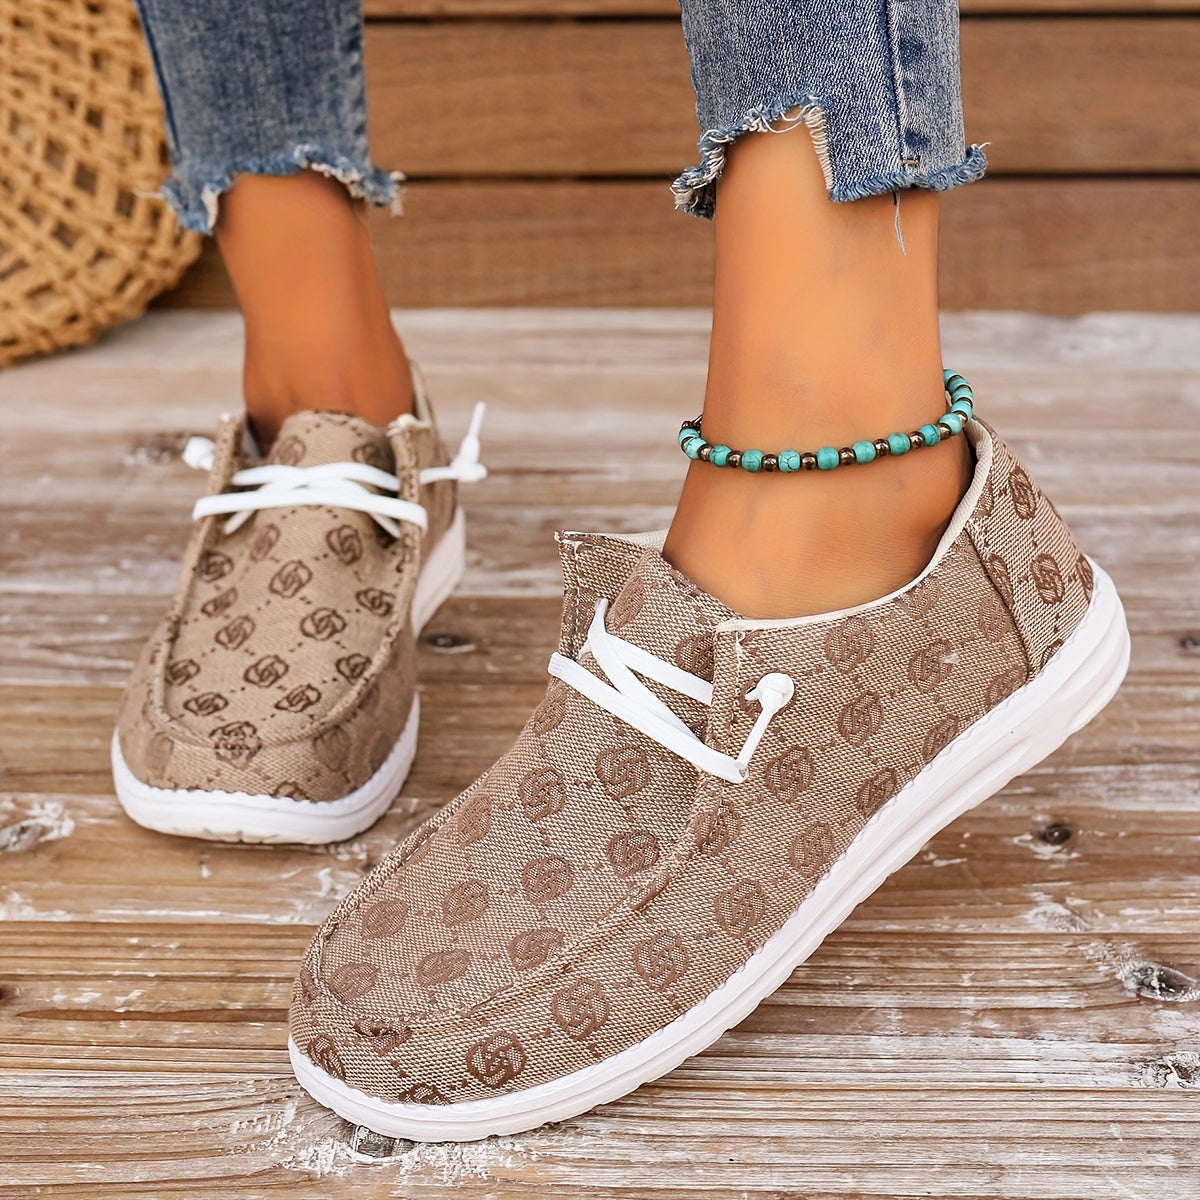 Women's Flower Pattern Canvas Shoes, Fashion Round Toe Slip On Flat Loafers, Casual Low Top Shoes